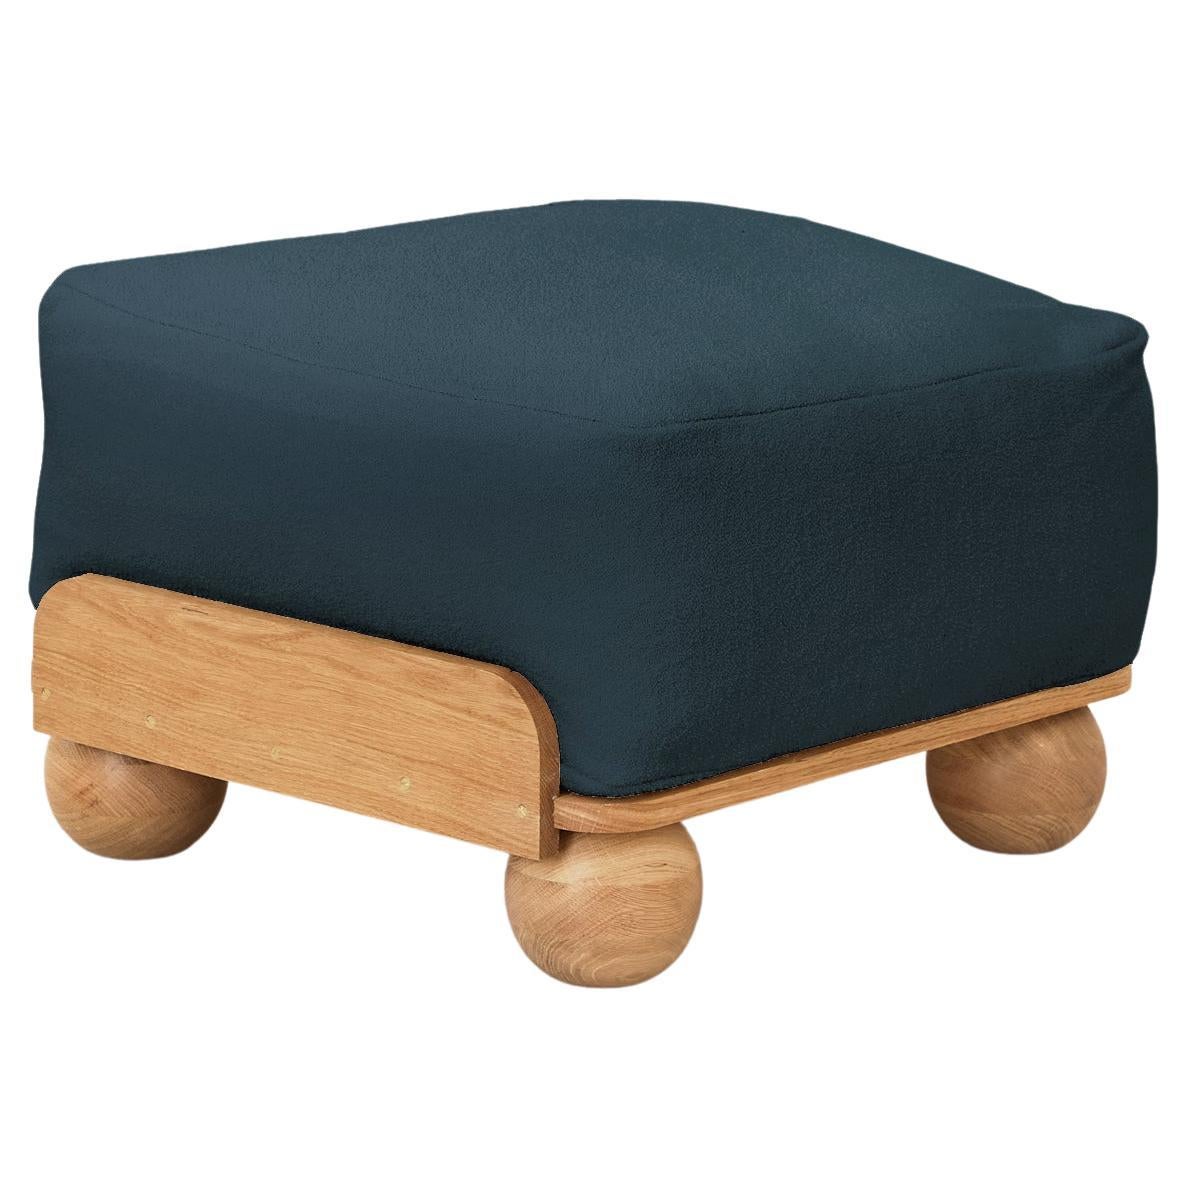 Cove Footstool in Midnight Blue For Sale